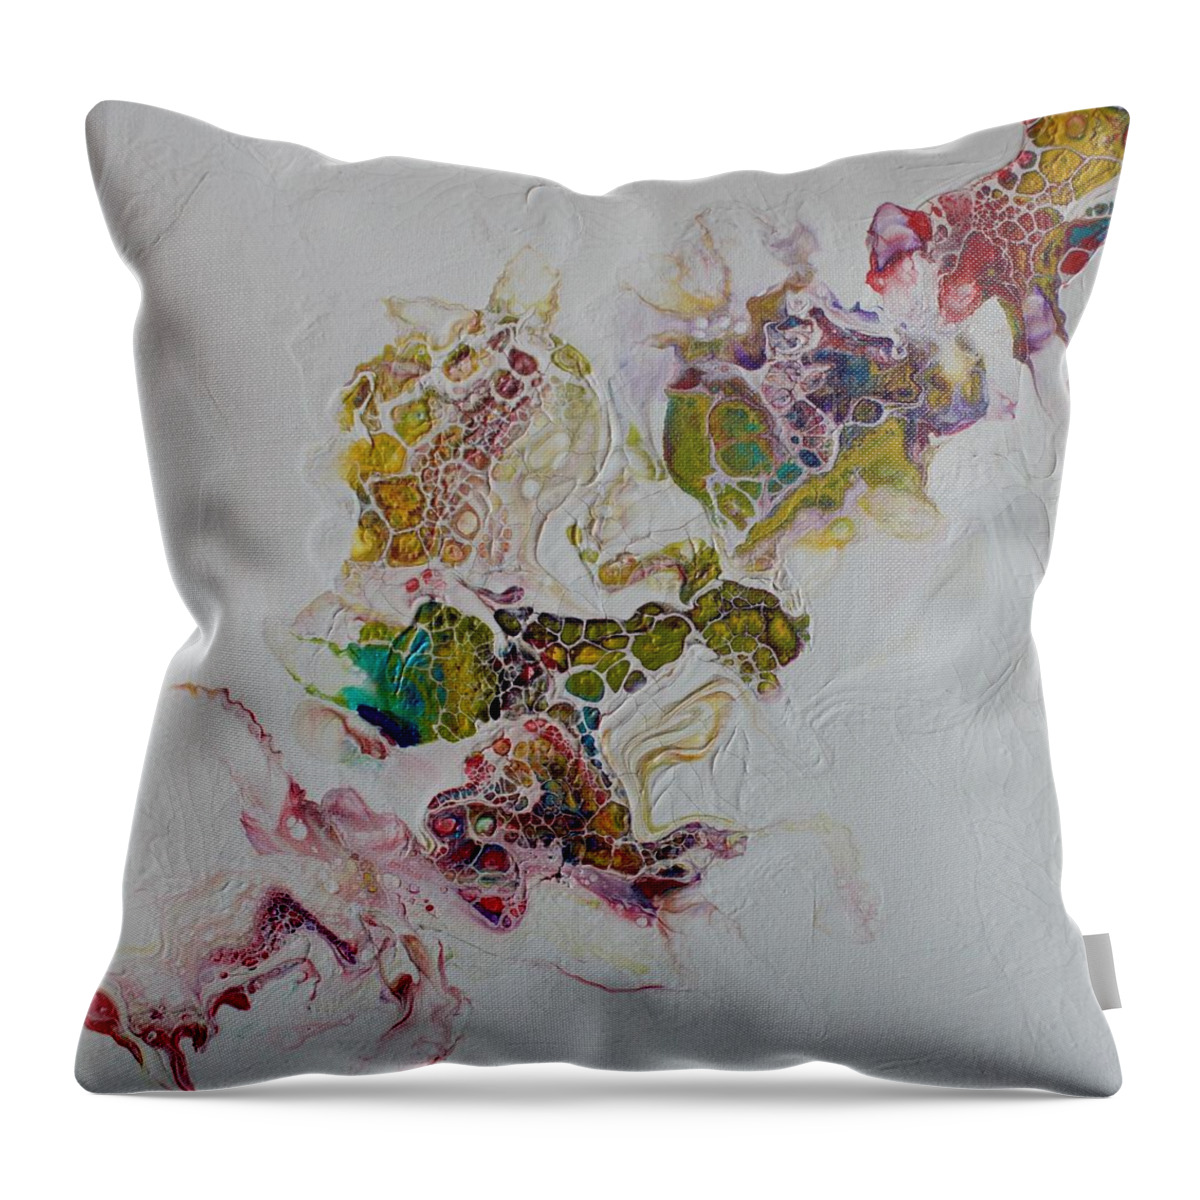 Abstract Throw Pillow featuring the painting Magic Dragon by Jo Smoley